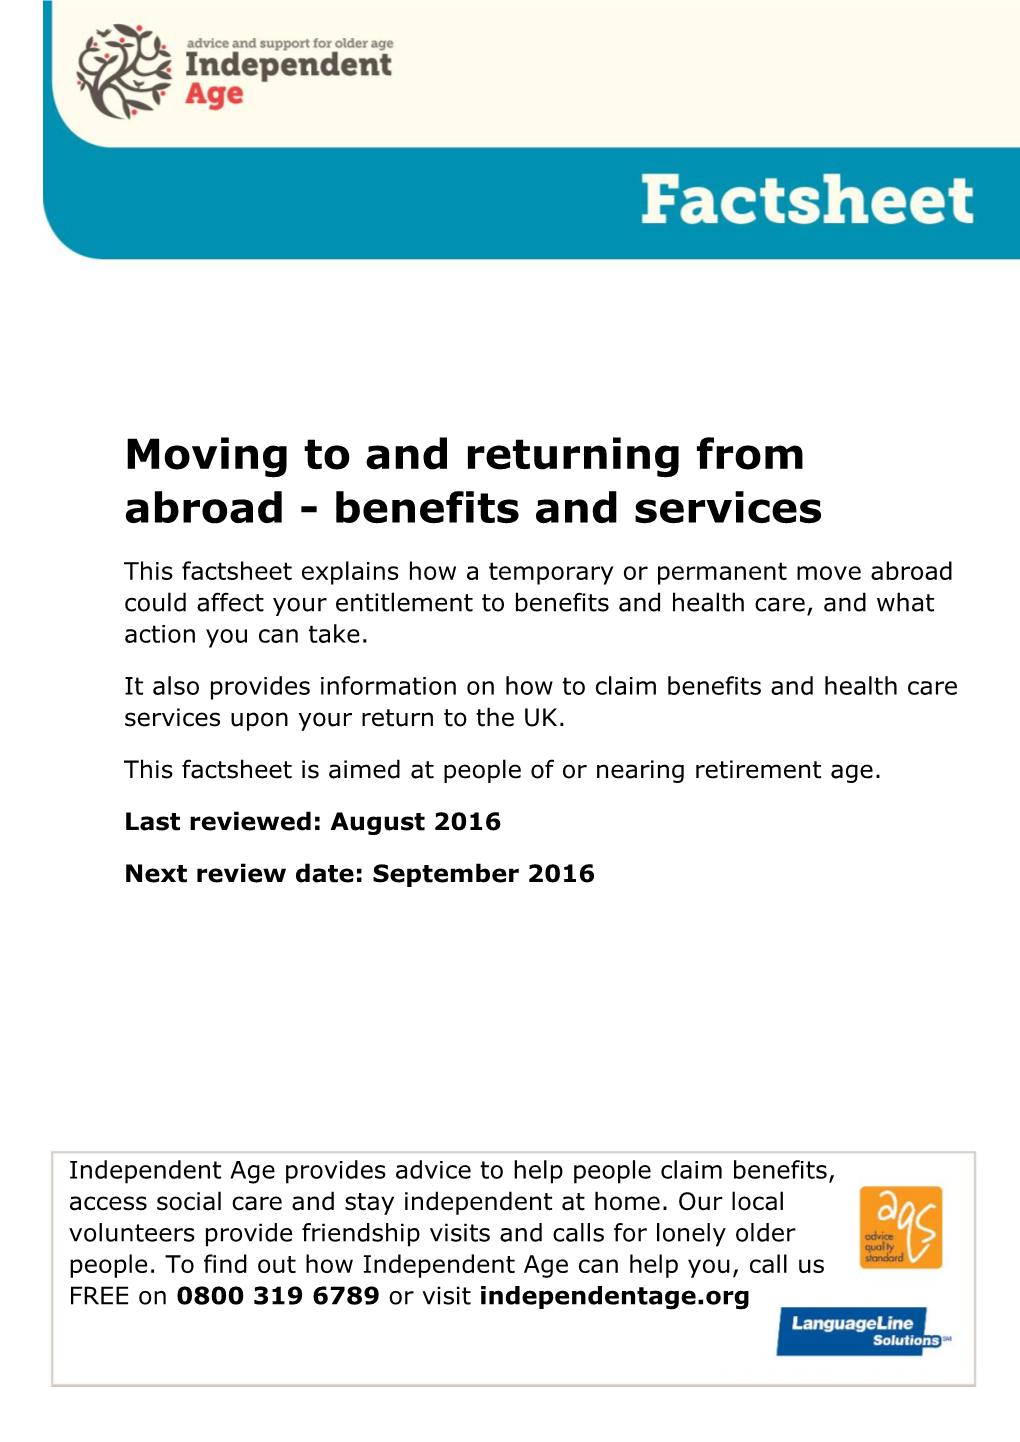 Moving to and Returning from Abroad - Benefits and Services